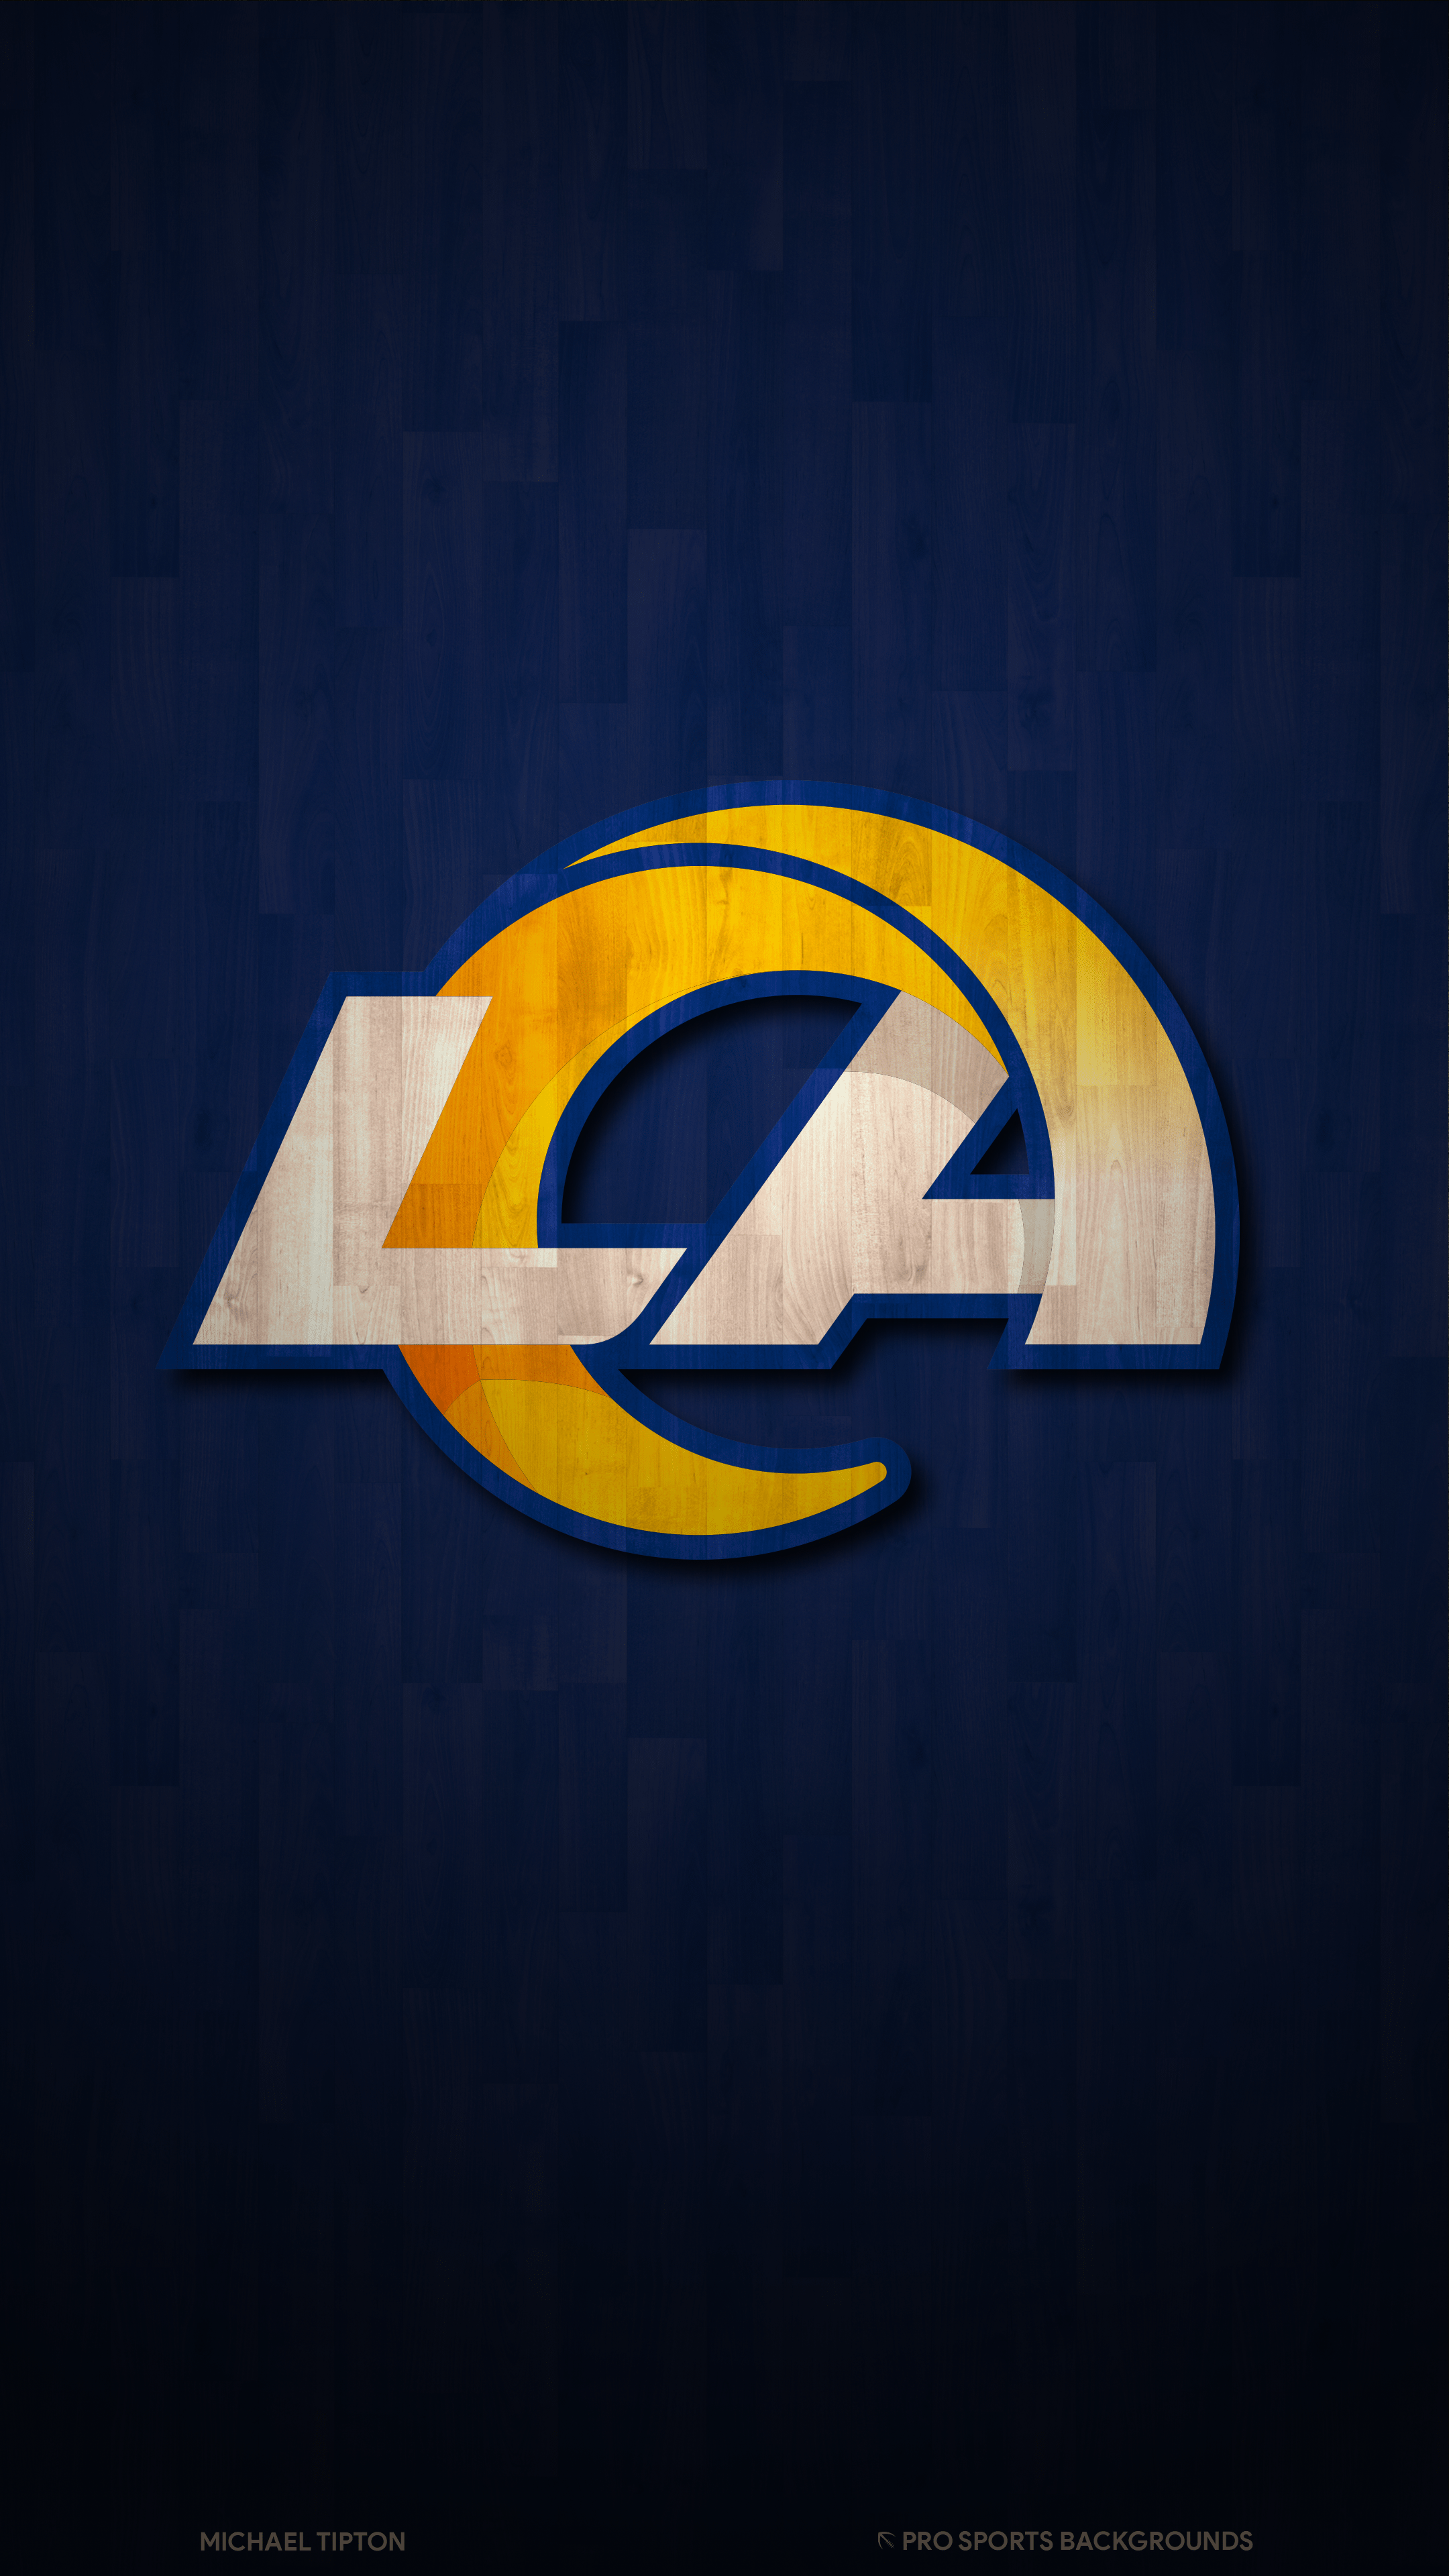 Los Angeles Rams on Twitter Calendars marked  Tickets purchased  Wallpapers updated Go ahead and check another box httpstco9Ceh9eryUk   Twitter